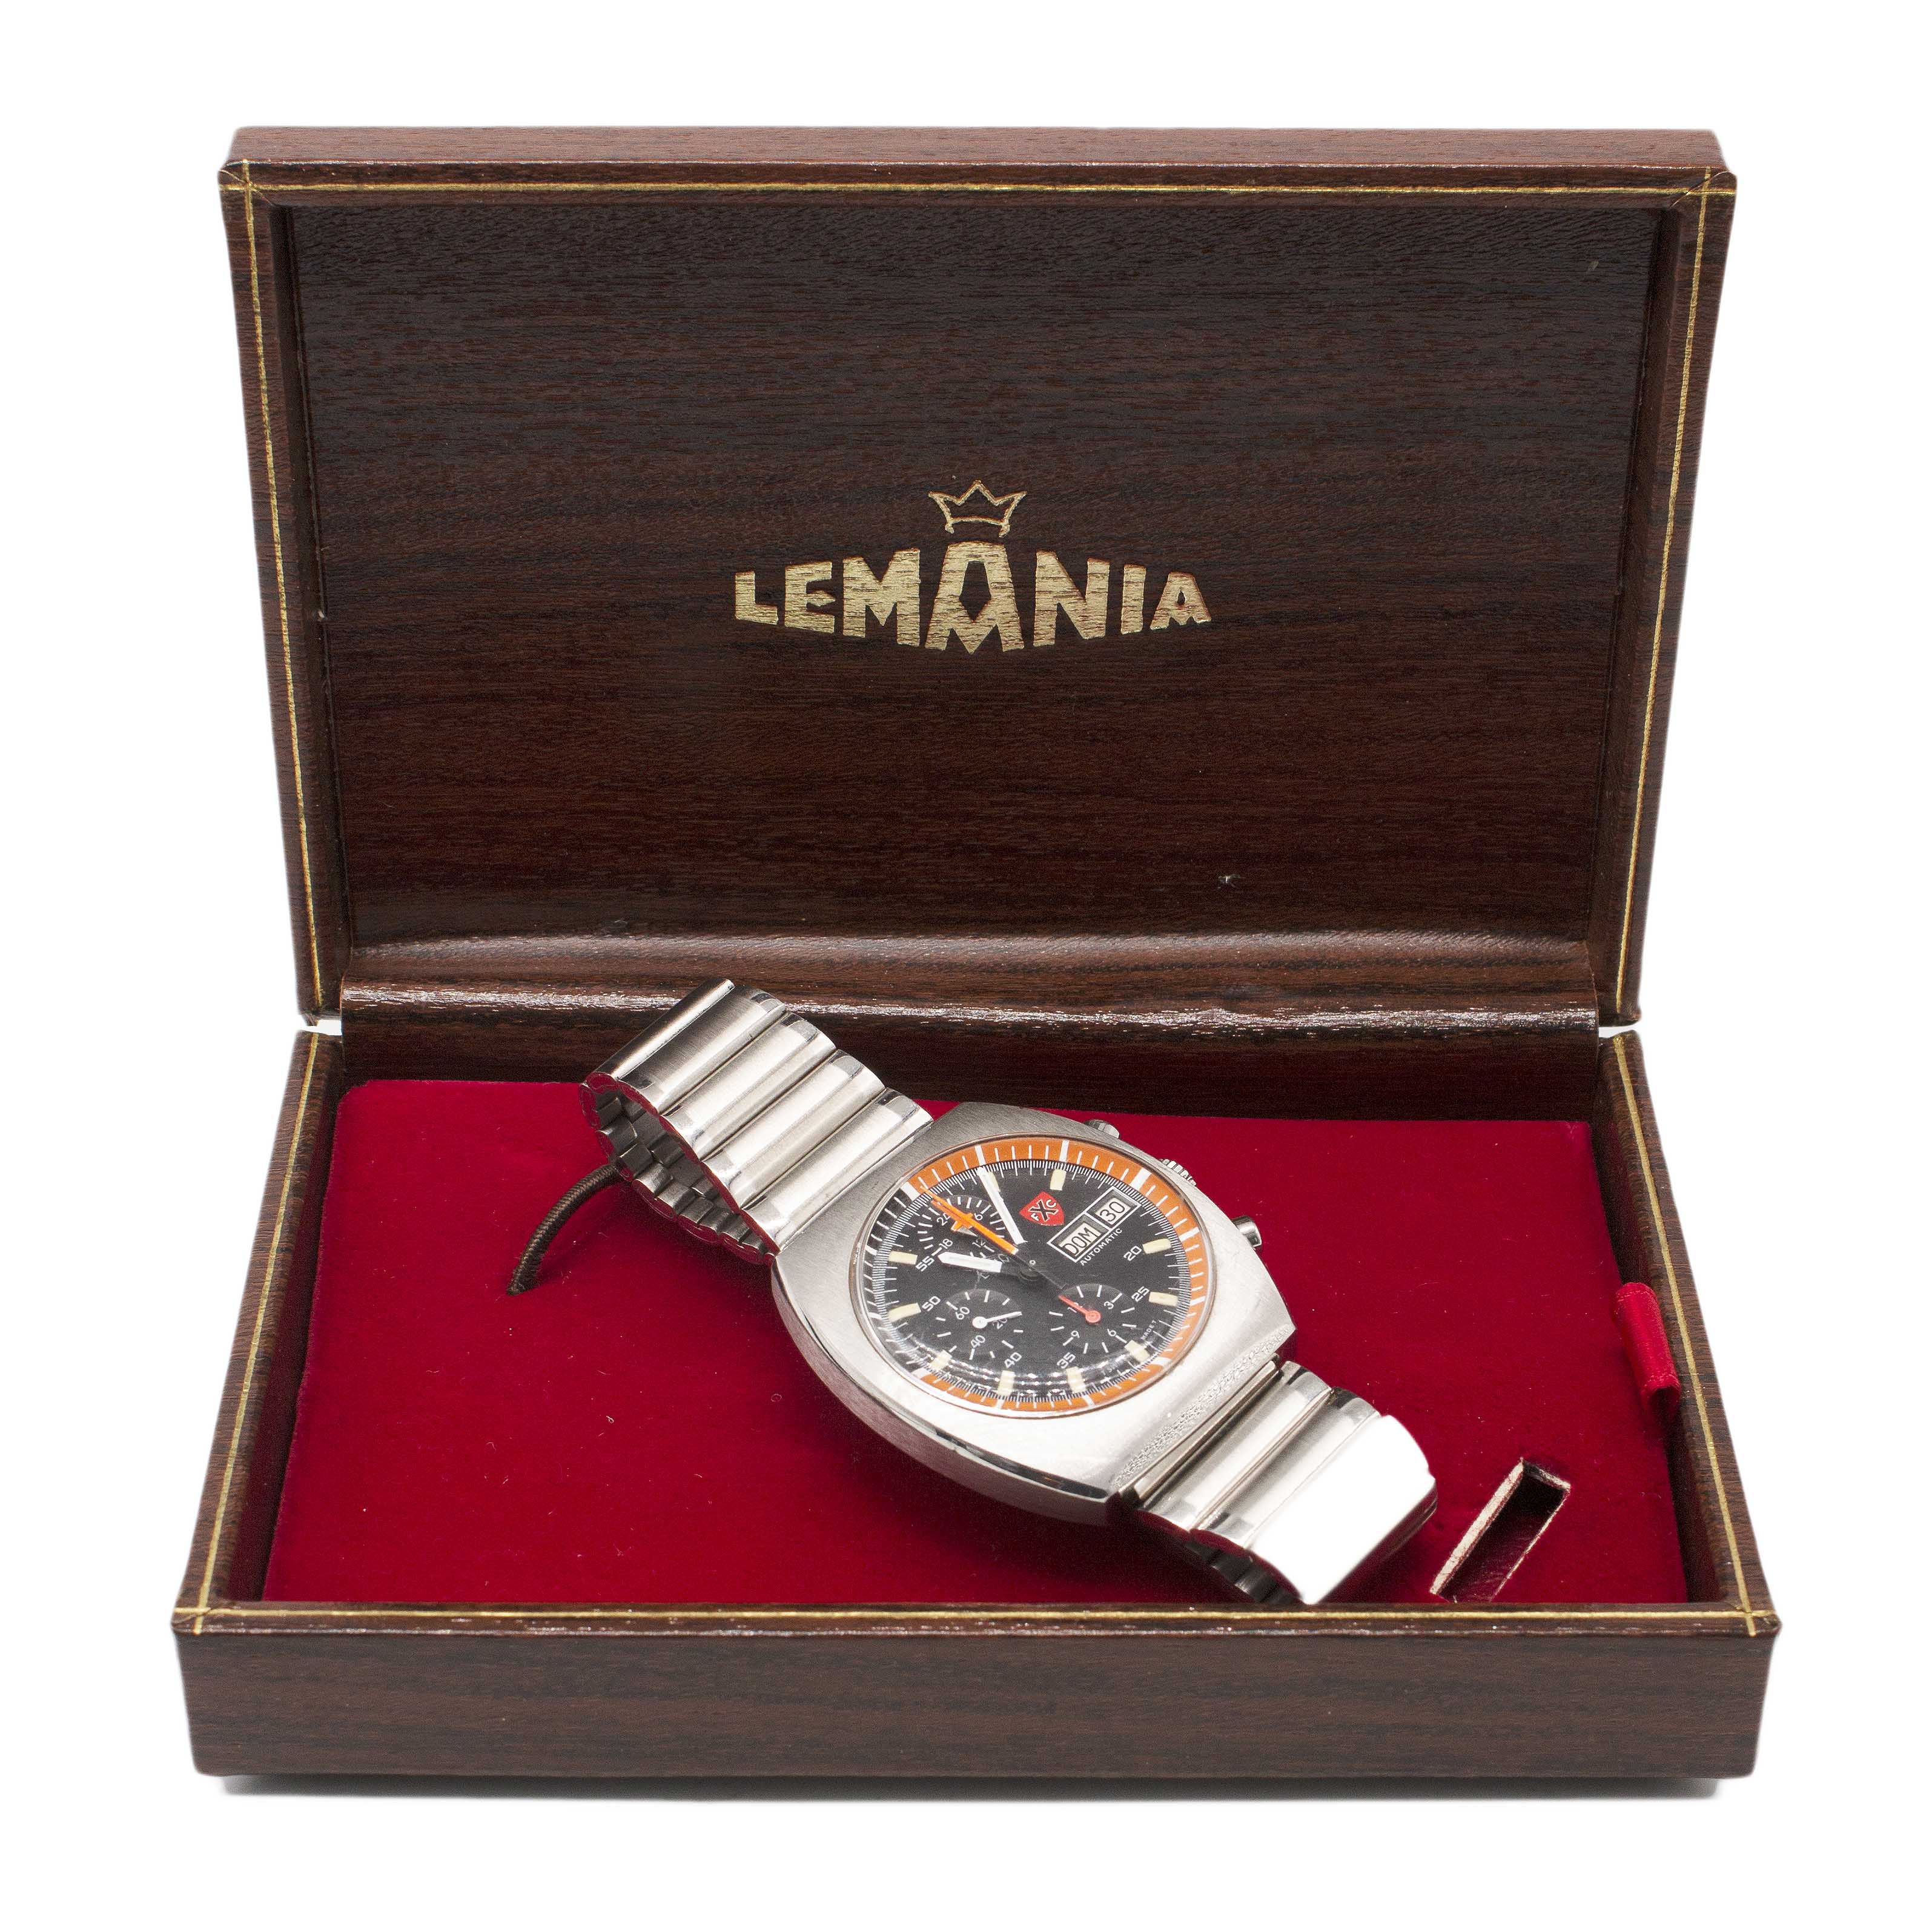 A GENTLEMAN'S STAINLESS STEEL LEMANIA "SOCCER TIMER" AUTOMATIC CHRONOGRAPH BRACELET WATCH CIRCA - Image 6 of 7